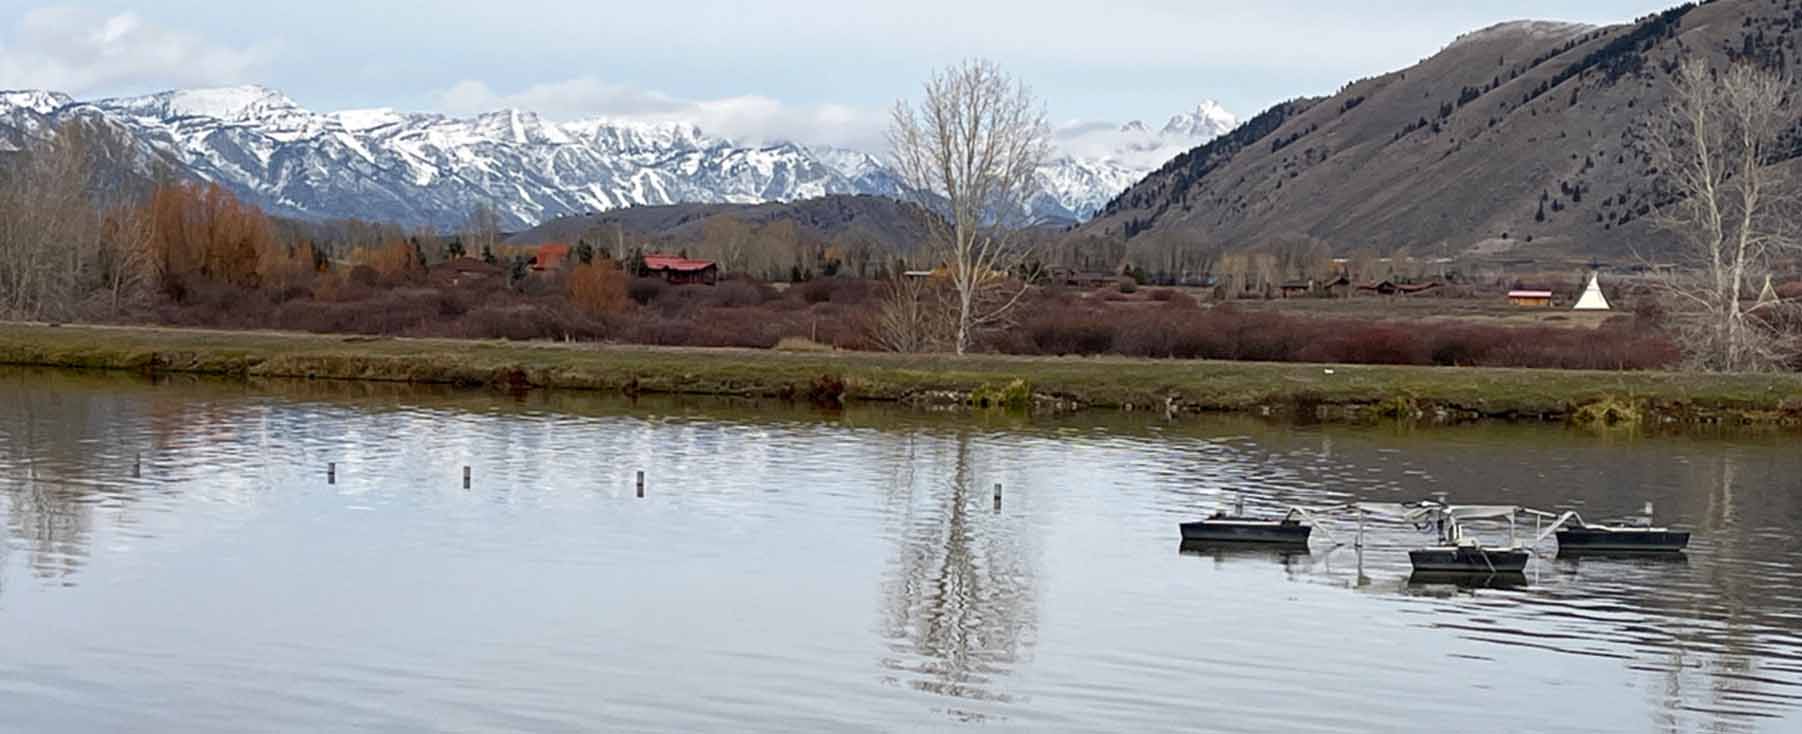 Wastewater treatment lagoon with mountains in the background